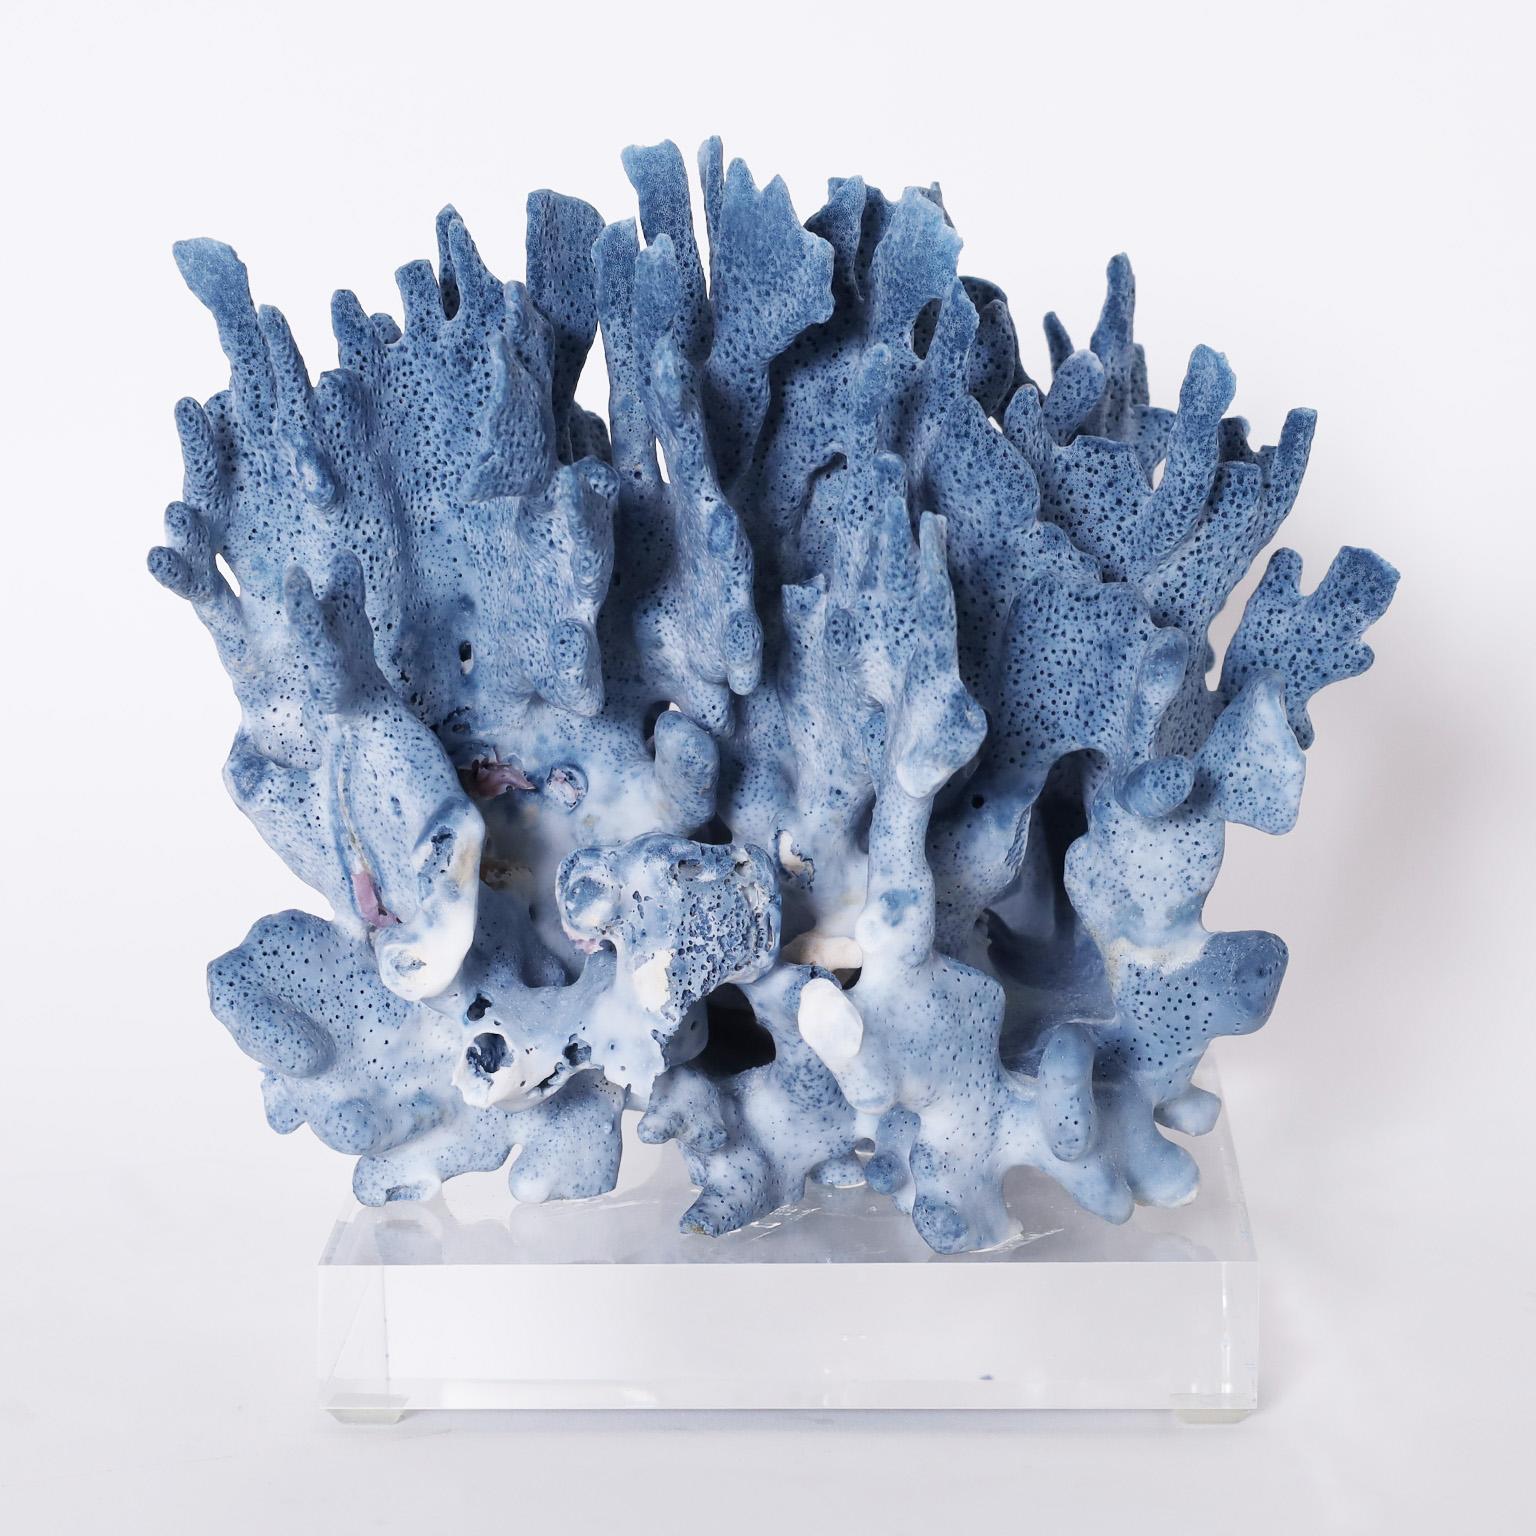 Three striking blue coral specimens each with its own sea inspired dramatic form and alluring blue colors designed and executed by F. S. Henemader Antiques from sustainable organic products. Presented on lucite bases to enhance their sculptural